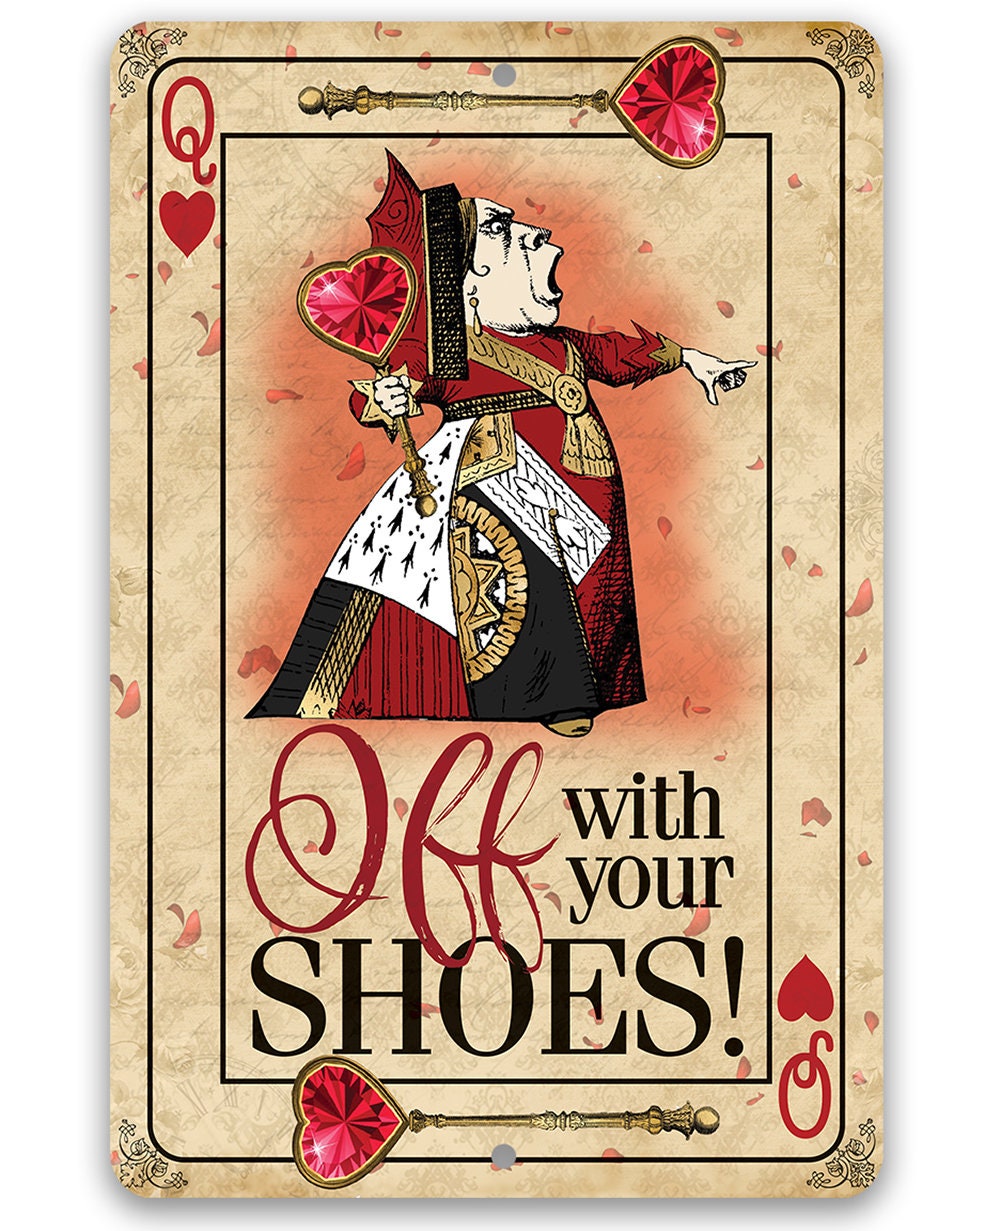 Off With Your Shoes Alice Queen of Hearts - 8" x 12" or 12" x 18" Aluminum Tin Awesome Metal Poster Lone Star Art 